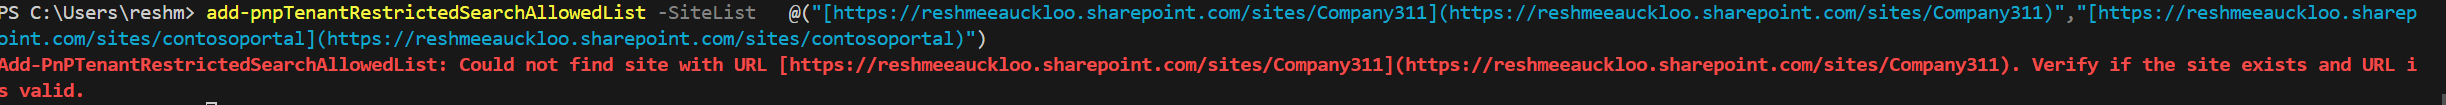 Could not find url